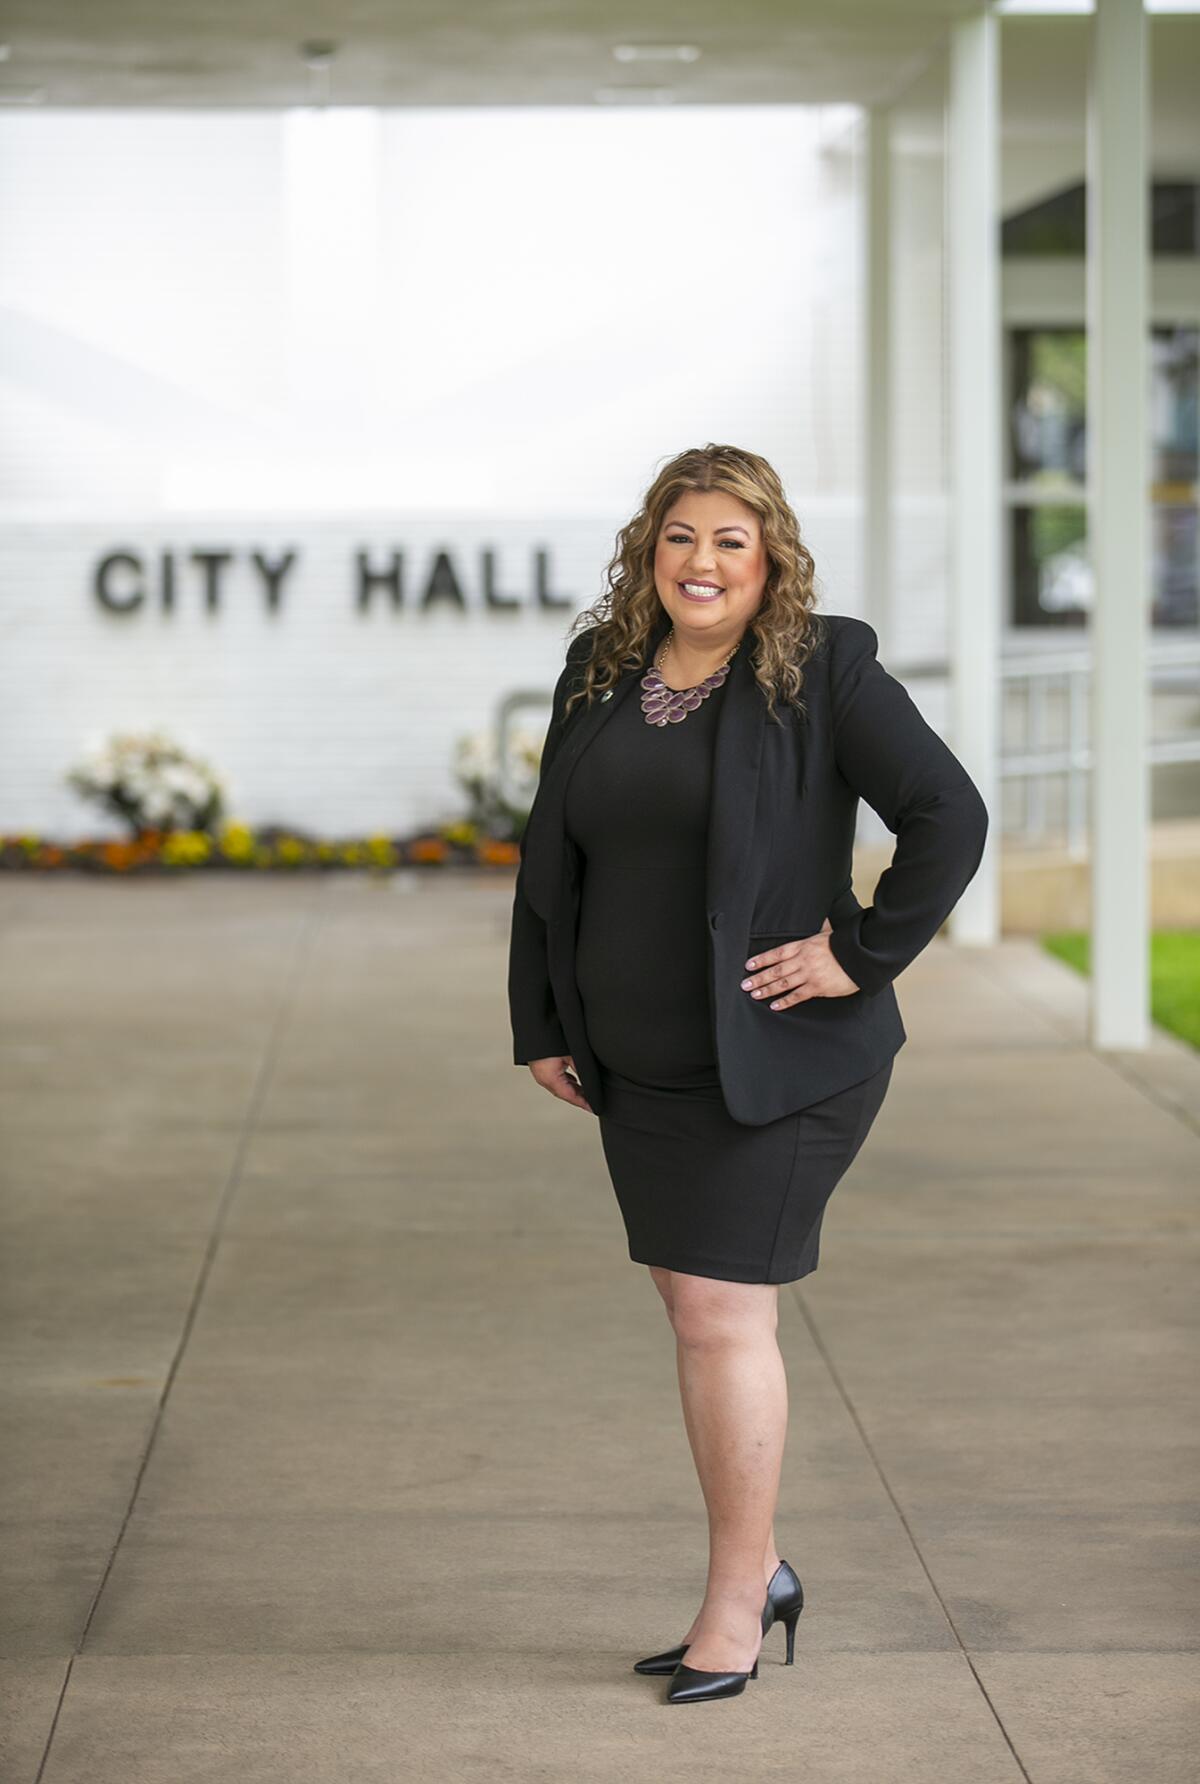 Alma Reyes, seen Tuesday outside City Hall, was recently hired to serve as Deputy City Manager for the city of Costa Mesa. 